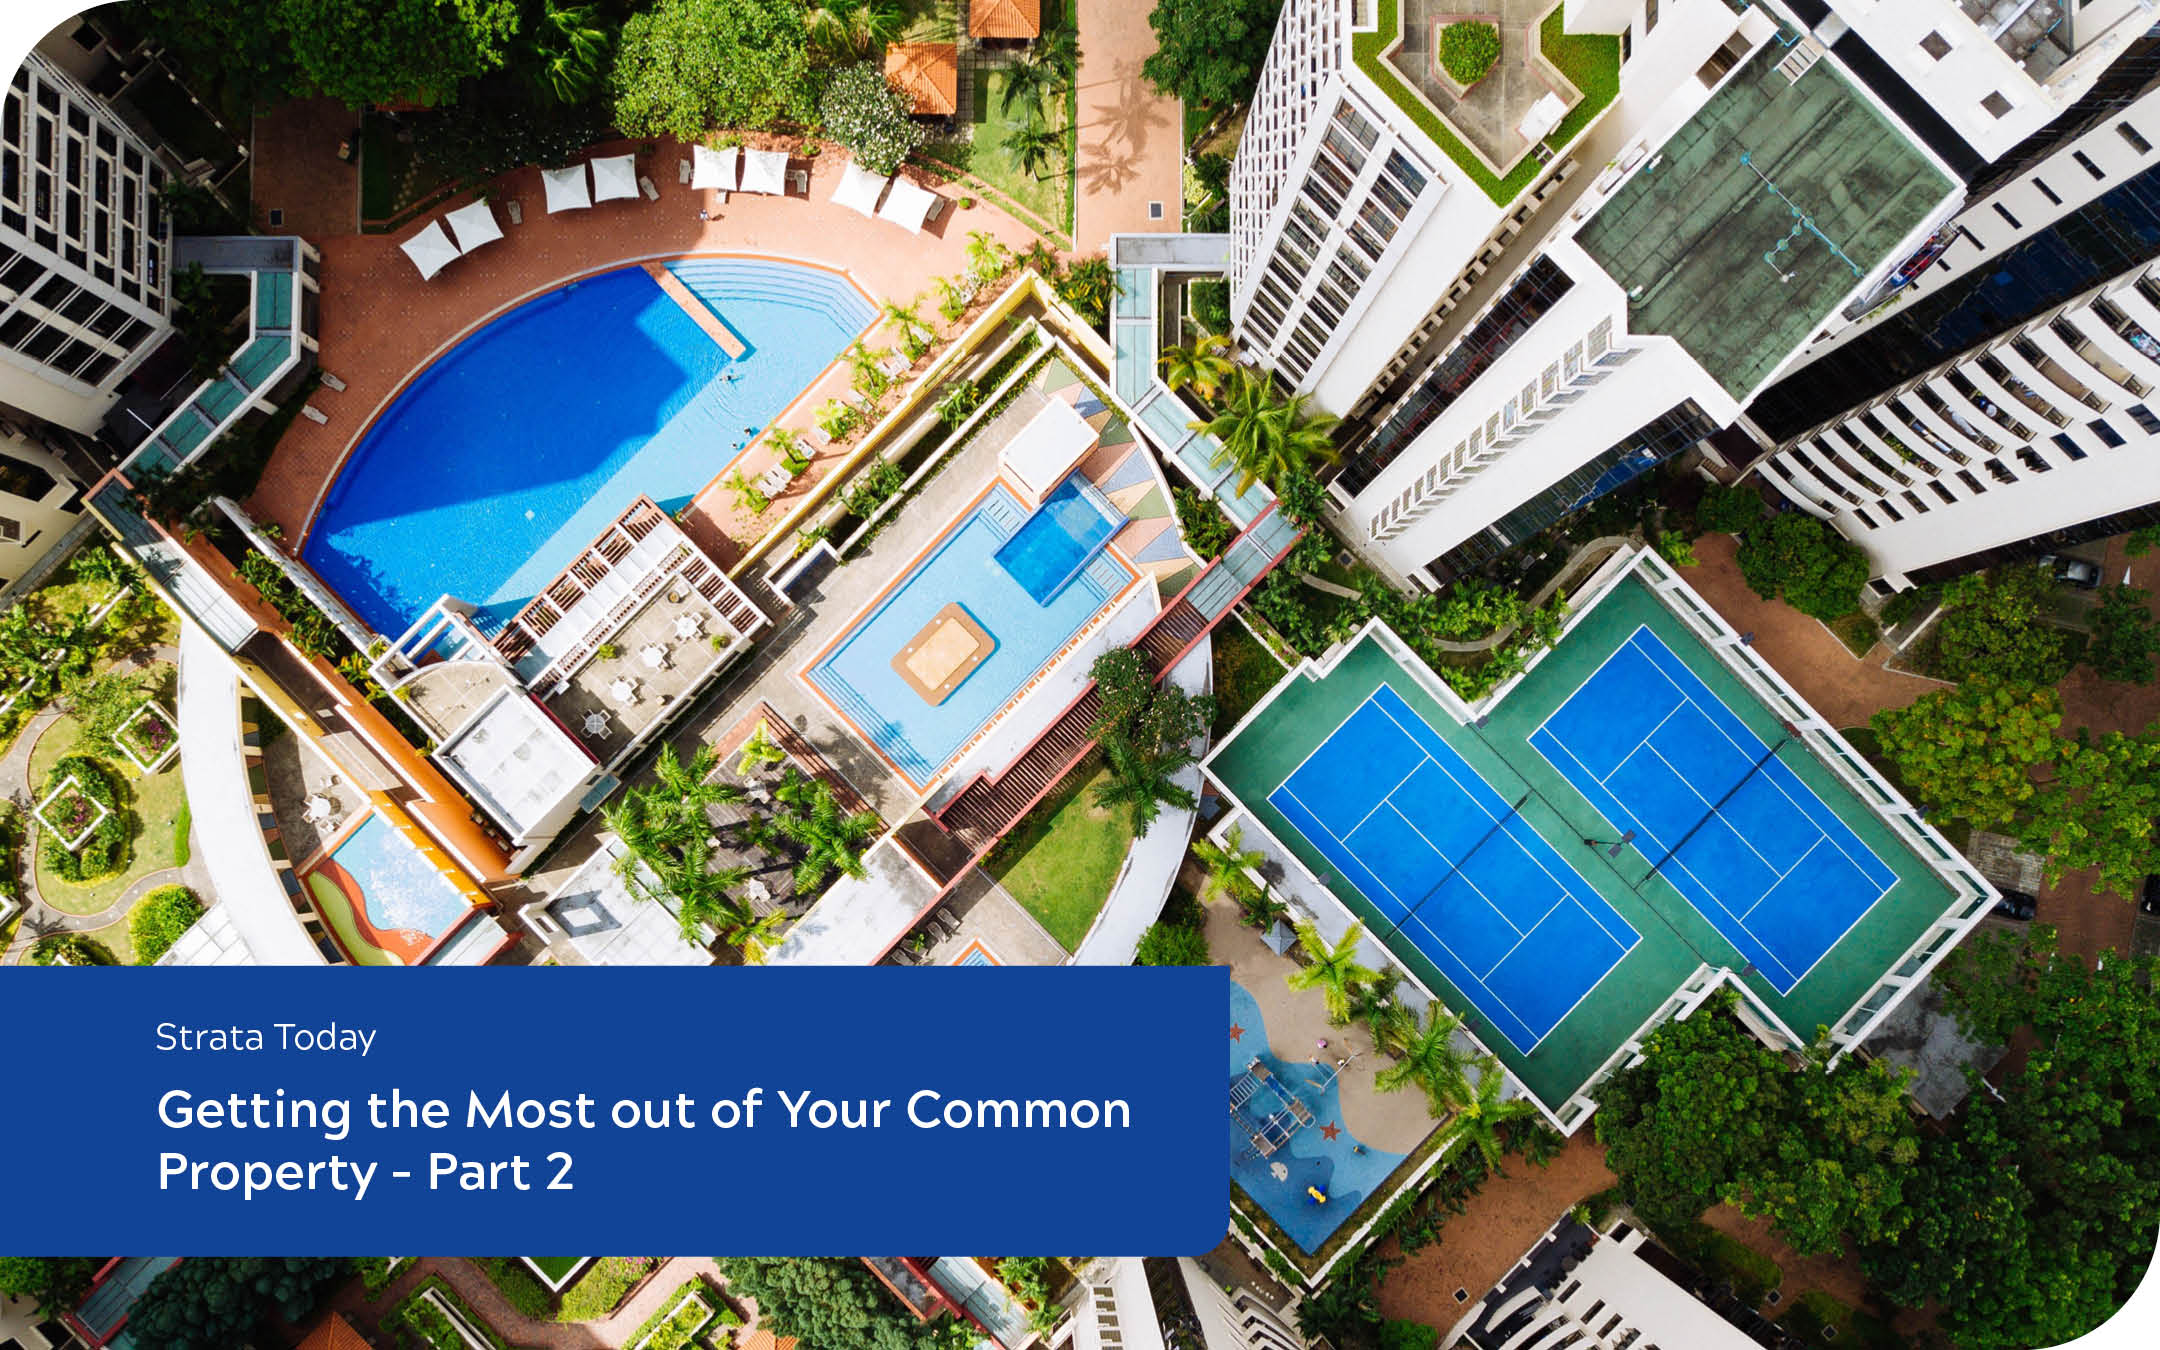 Getting the Most out of Your Common Property – Part 2